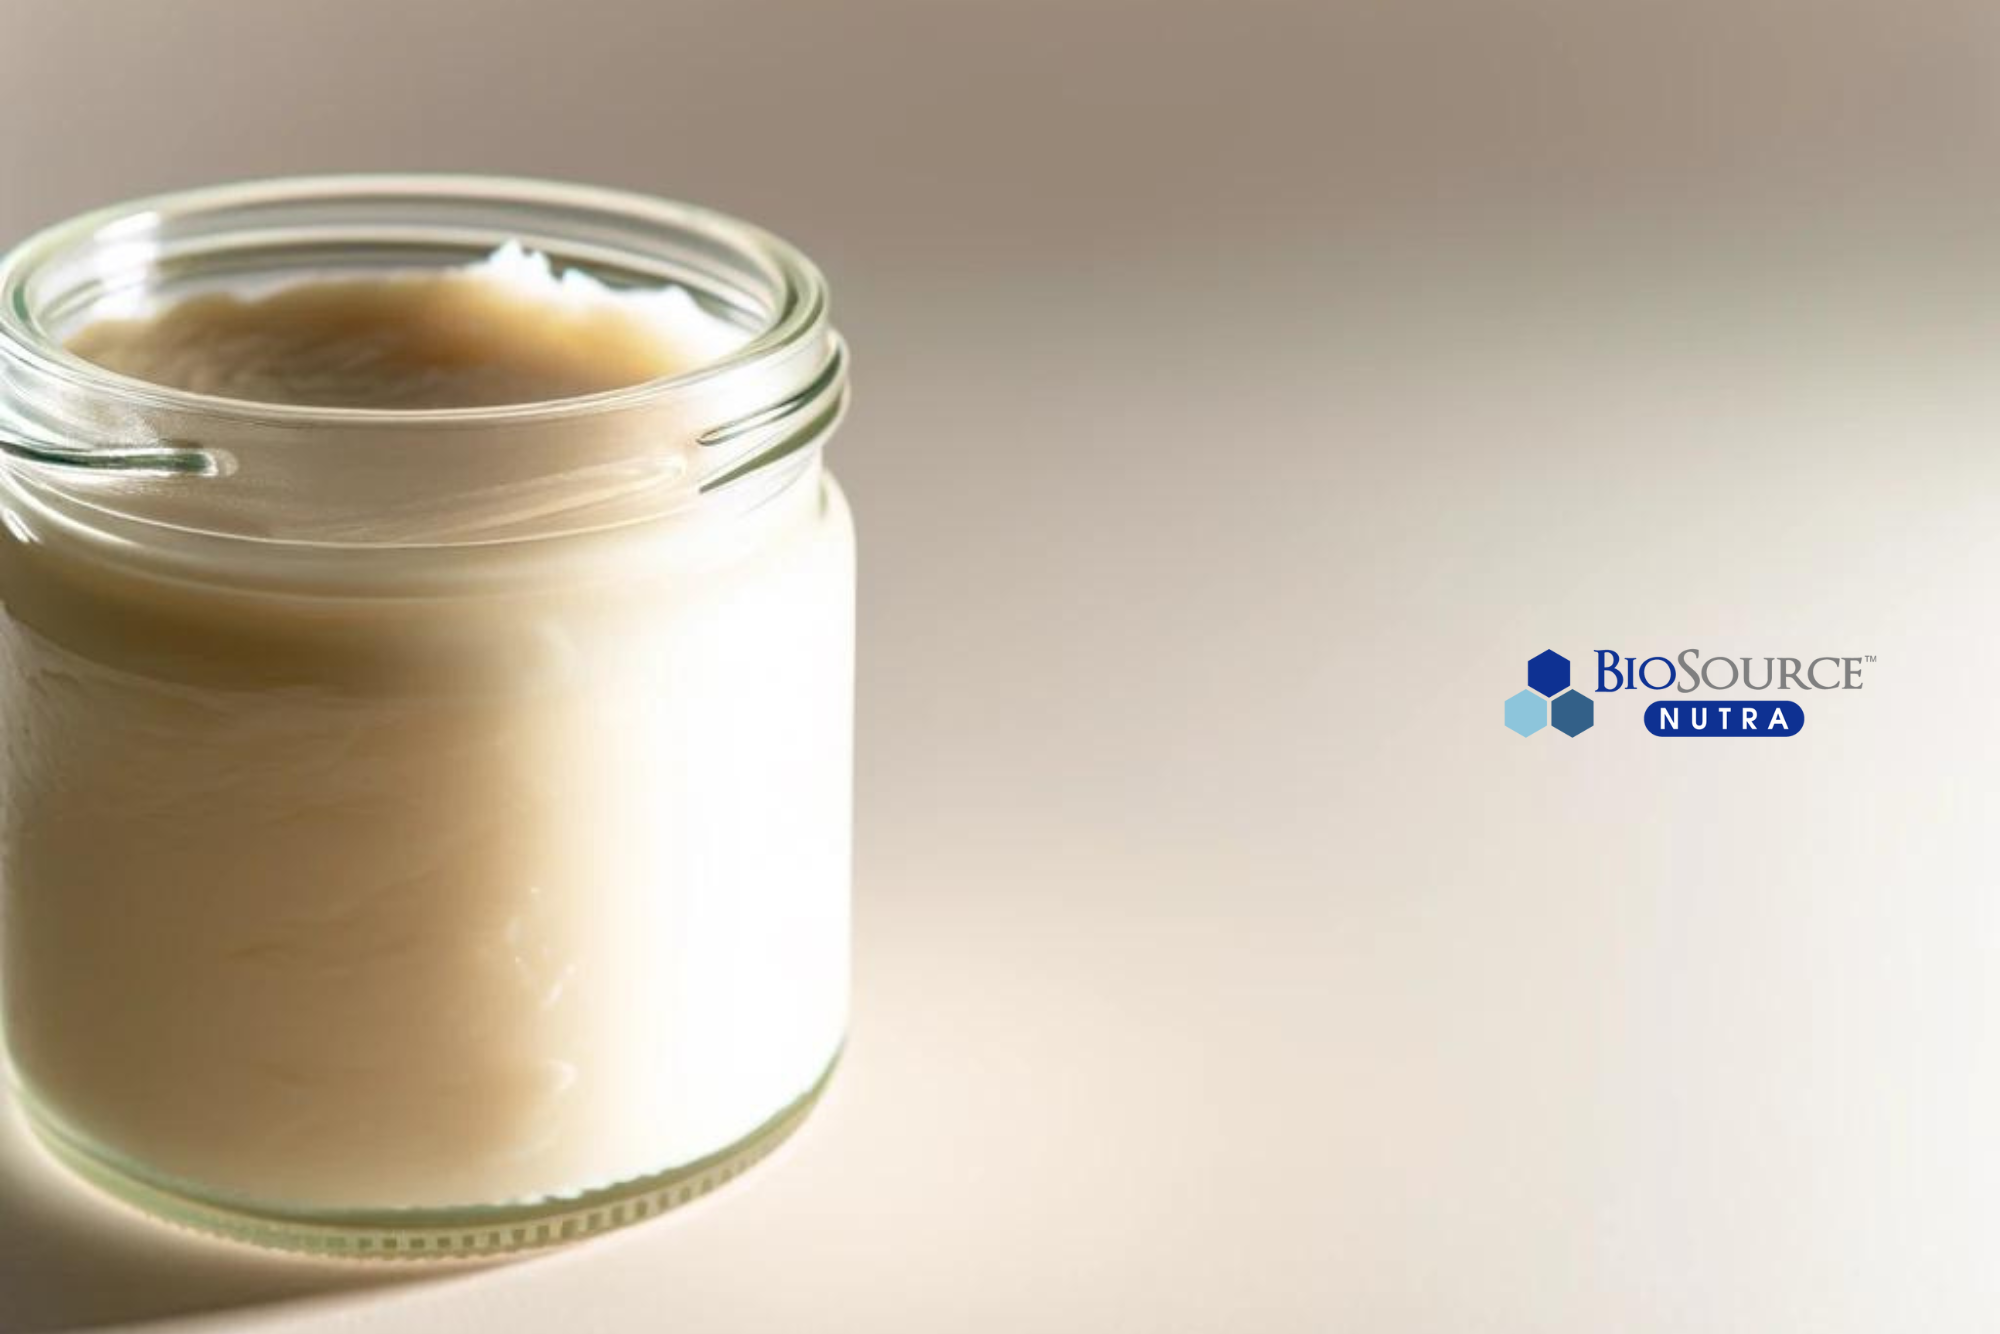 Tallow stored in a glass jar